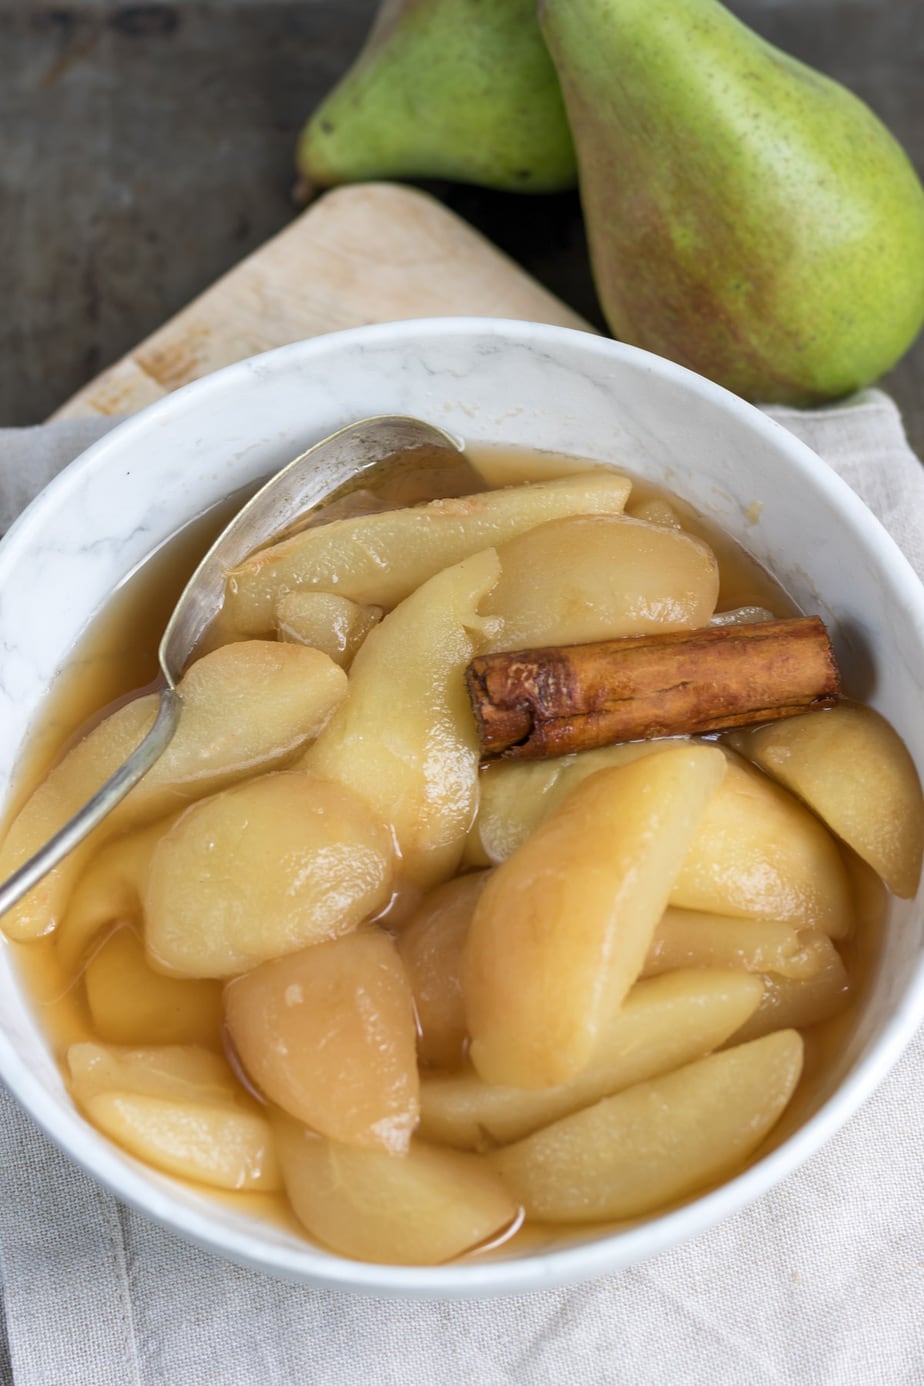 Close up of a bowl of stewed pears with a cinnamon stick and a serving spoon.